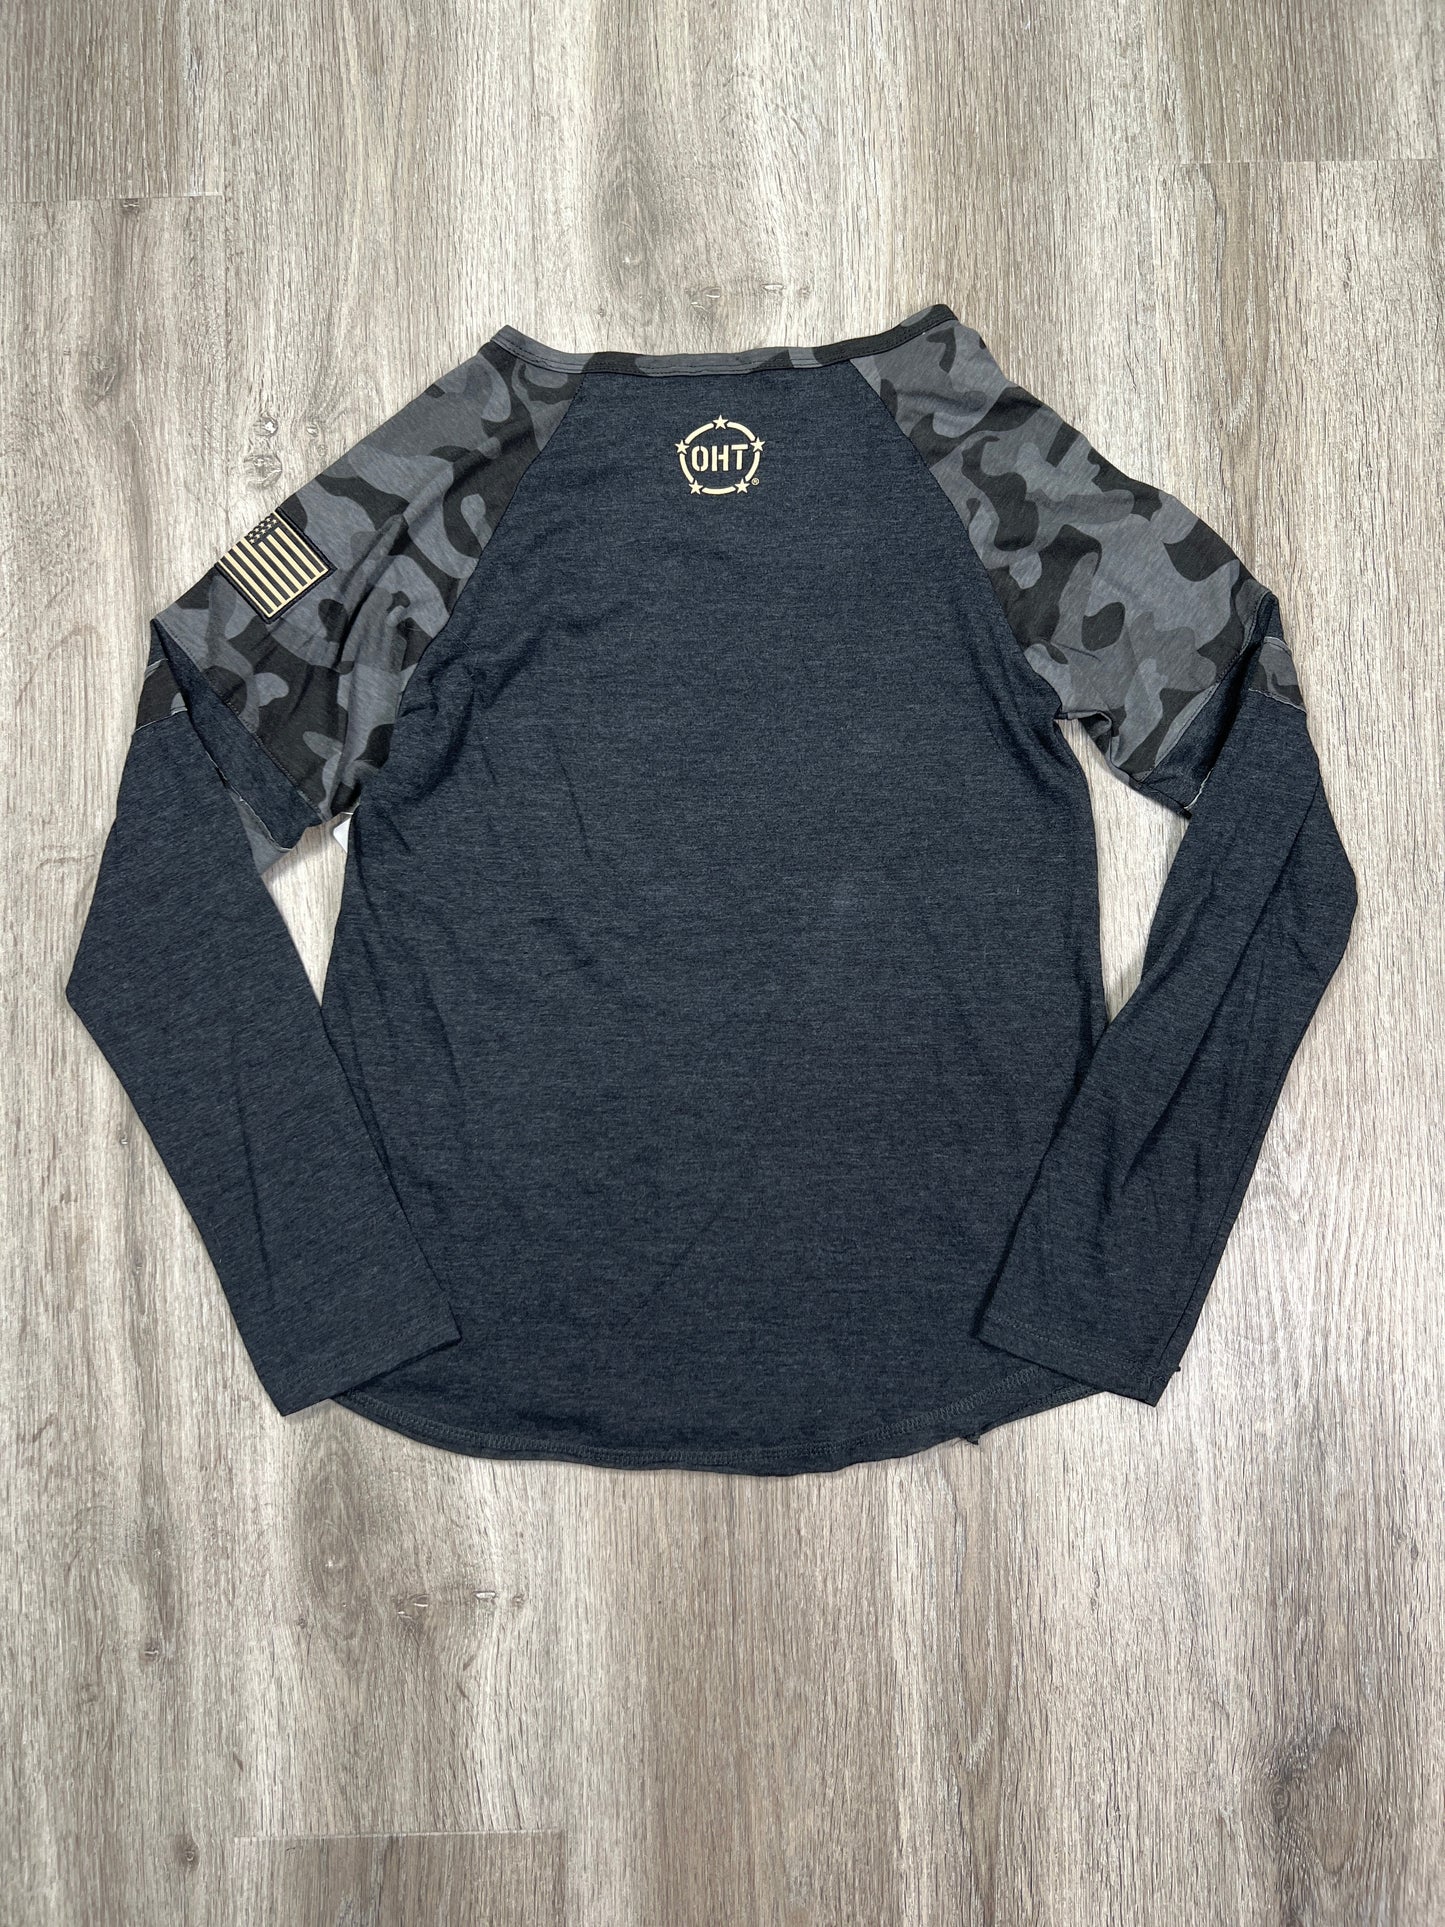 Grey Top Long Sleeve Colosseum, Size M